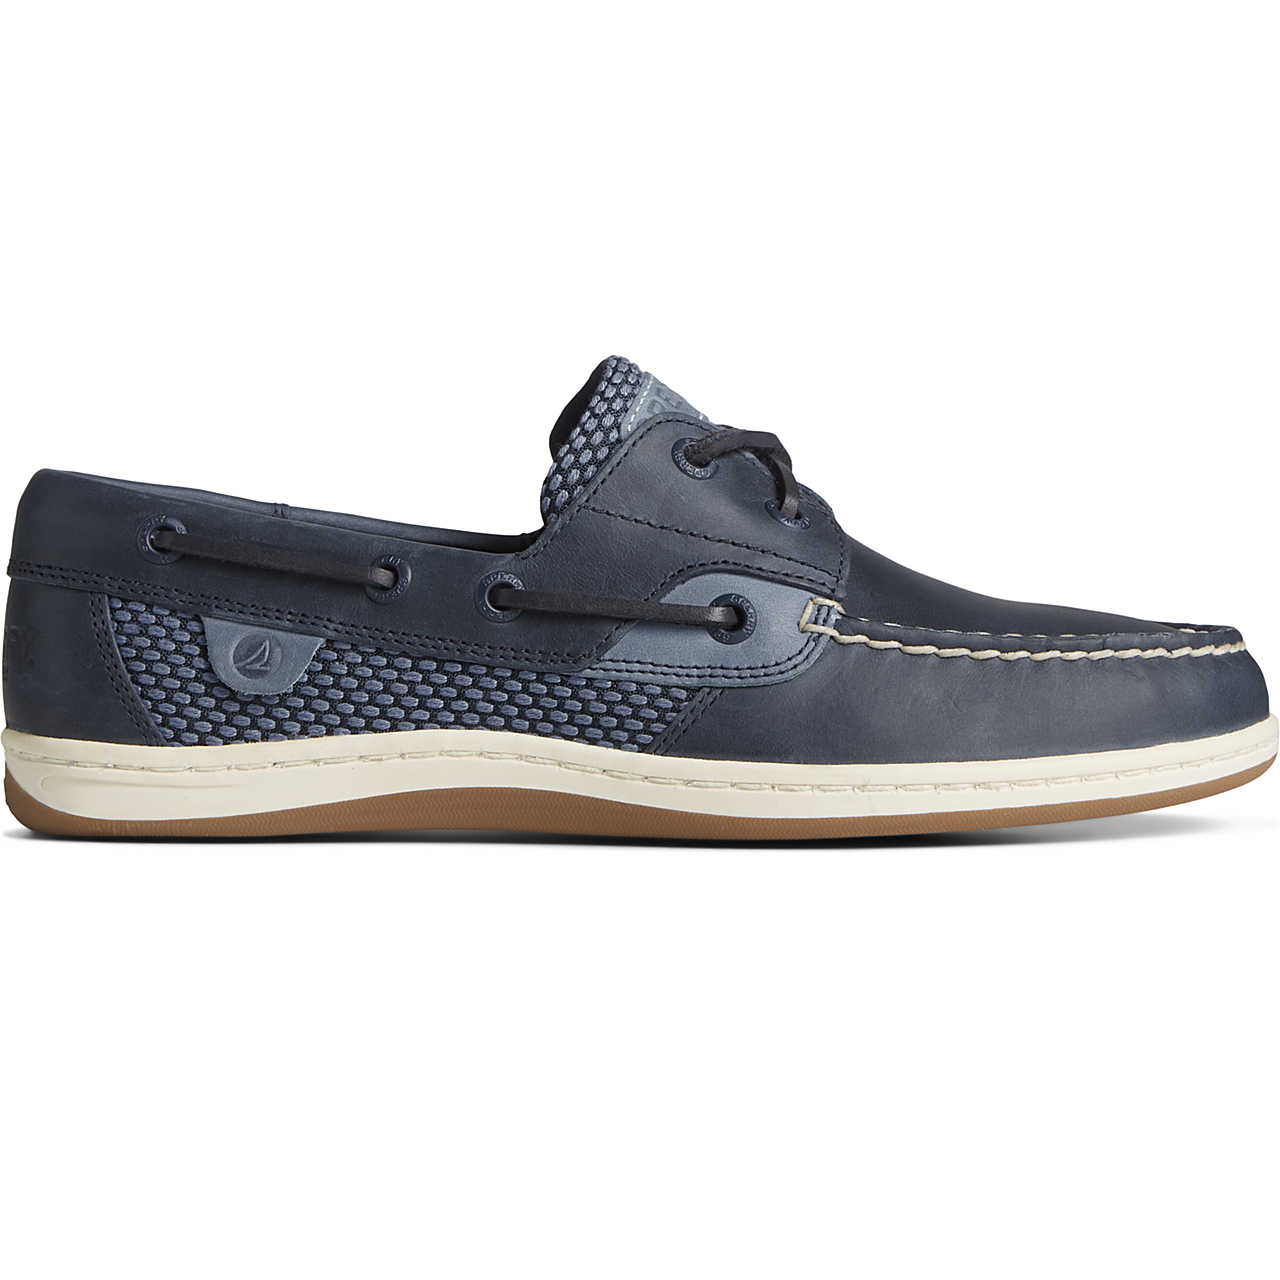 Women's Koifish Two-Tone Boat Shoe - Boat Shoes | Sperry